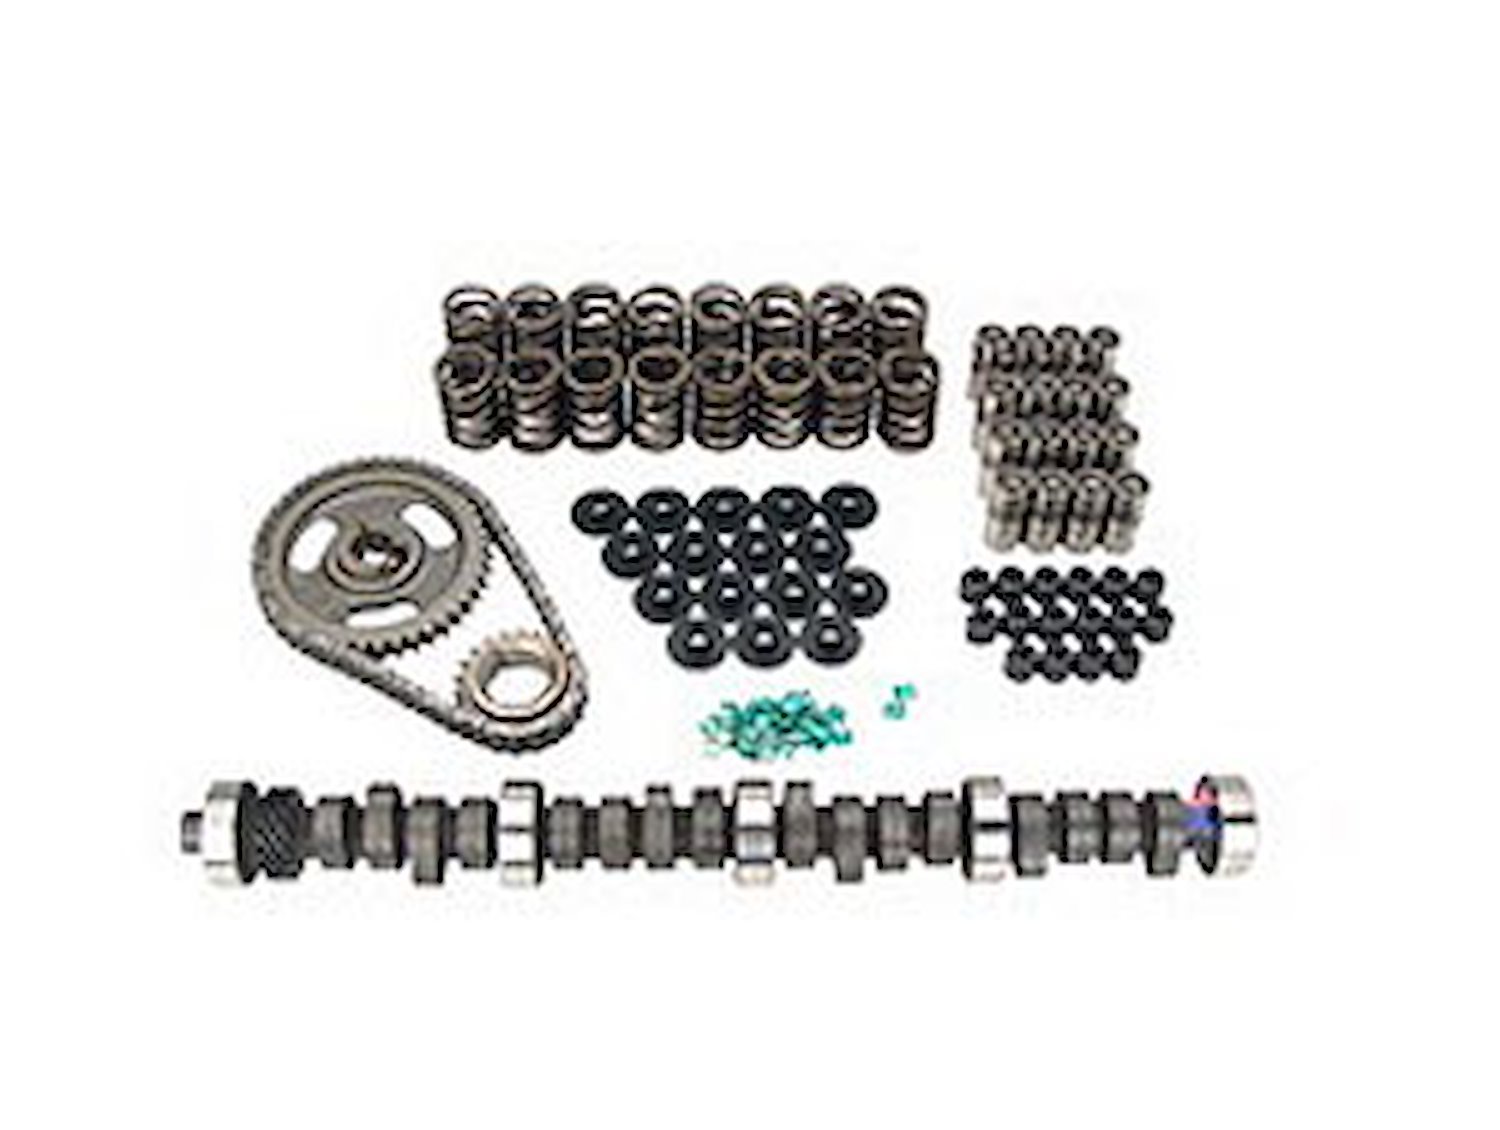 High Energy 252H Hydraulic Flat Tappet Camshaft Complete Kit Lift: .468" /.468" Duration: 252°/252° RPM Range: 800-4800